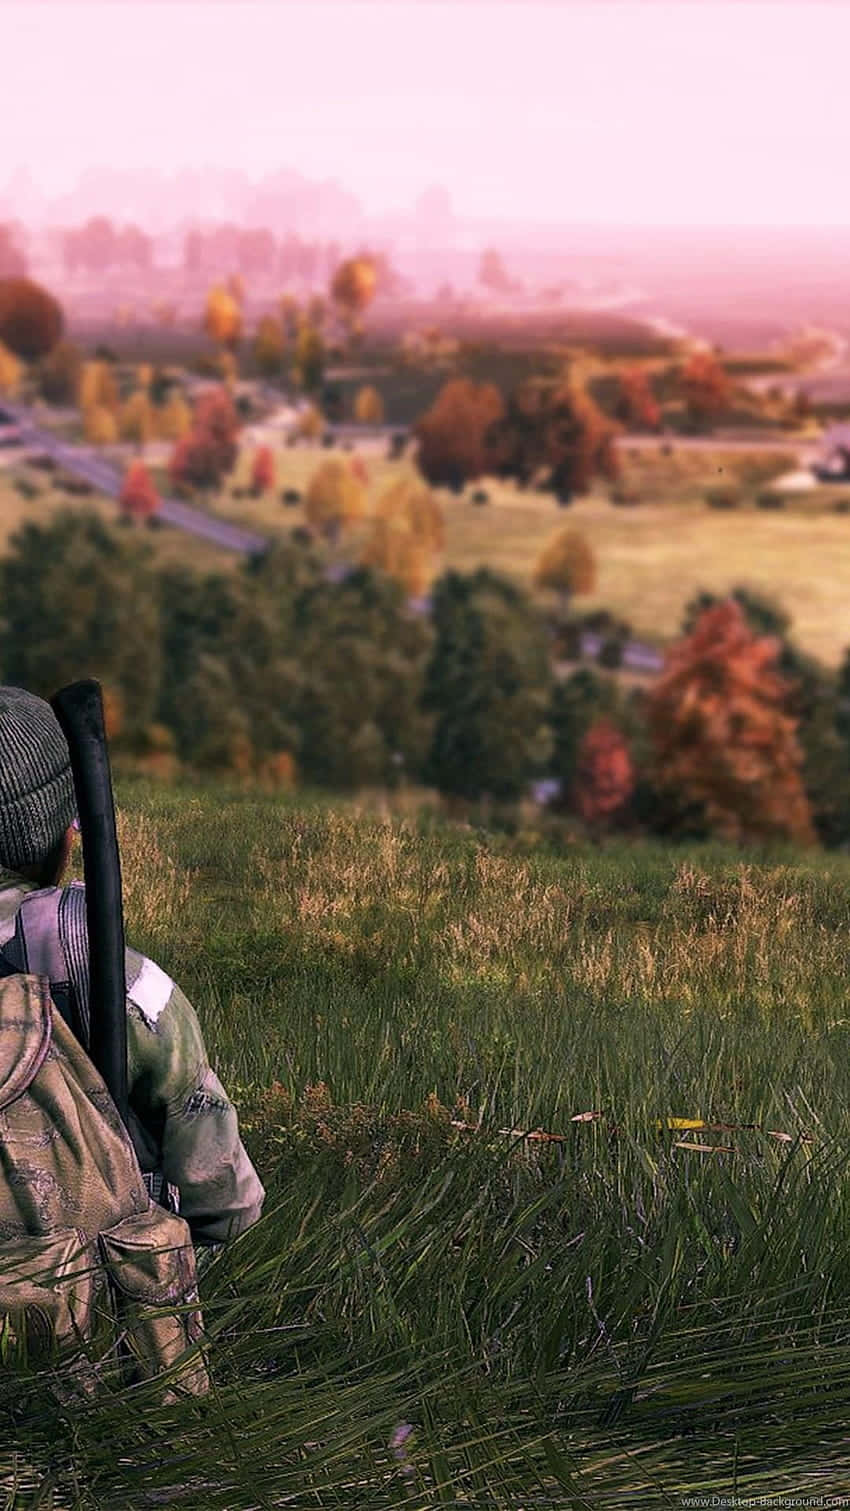 A Man Is Sitting In A Field With A Backpack